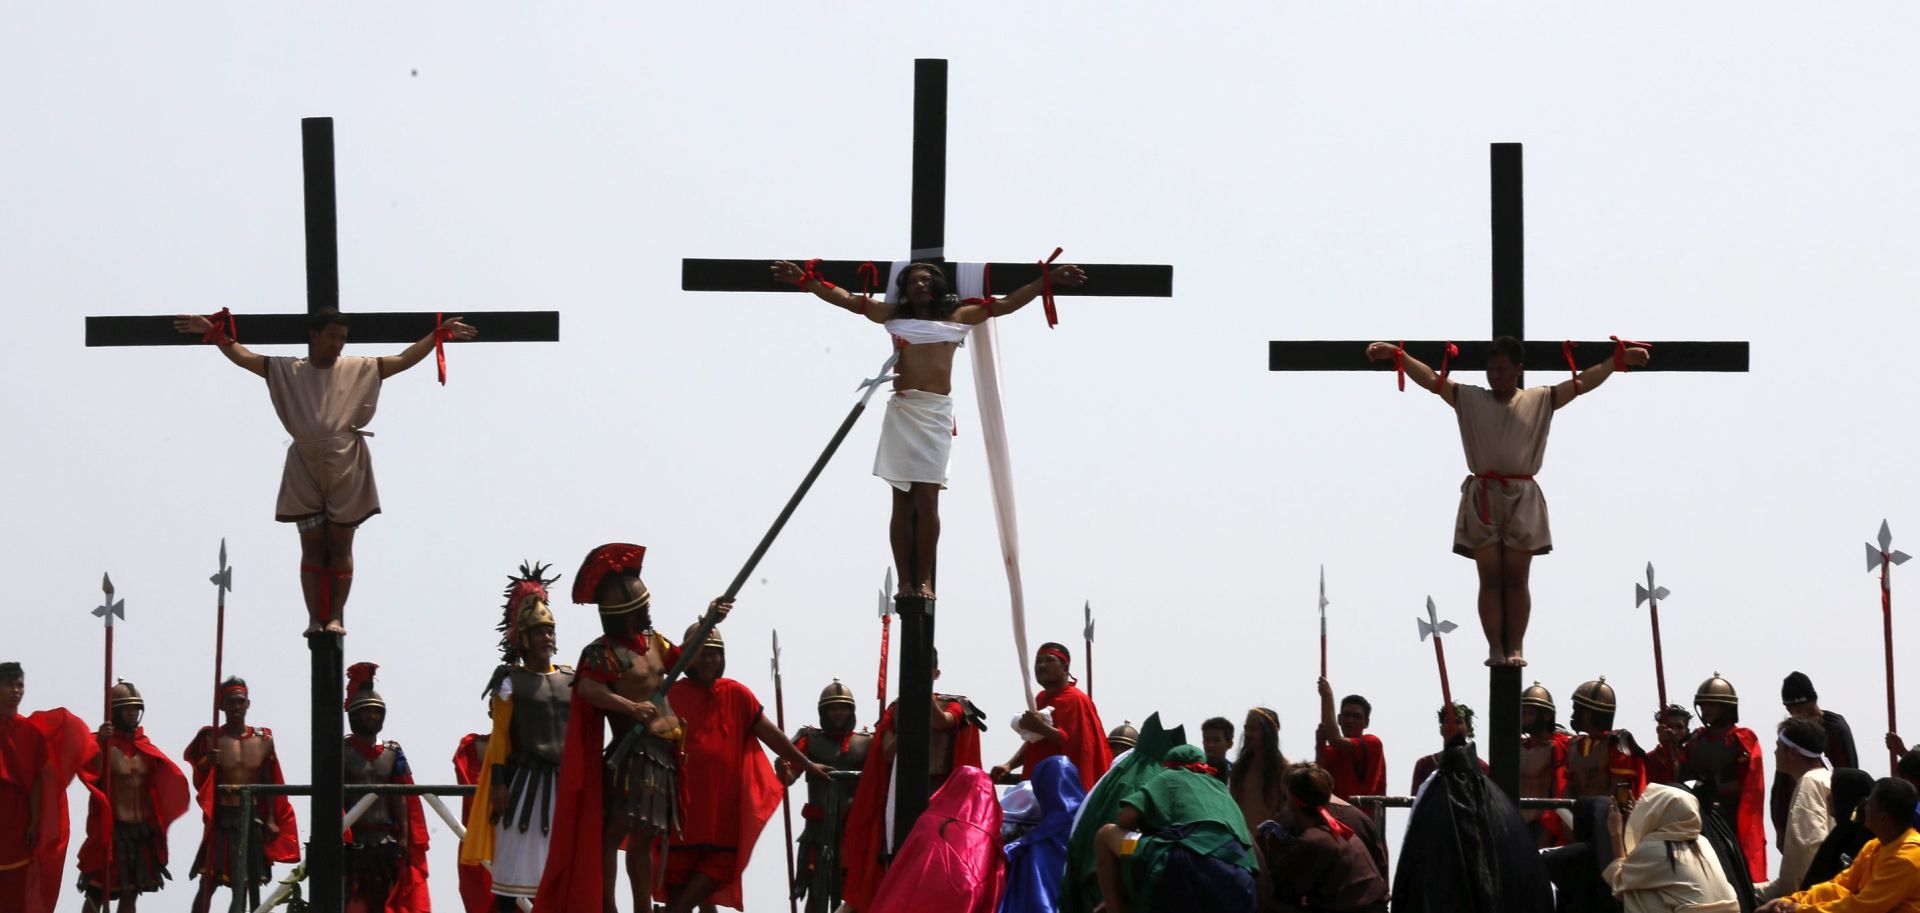 epa05230131 Filipino penitent Ruben Enaje (C) is nailed to a wooden cross for the 30th year, during the re-enactment of the crucifixion of Jesus Christ on Good Friday, in San Pedro Cutud village, San Fernando city, north of Manila, Philippines, 25 March 2016. Thousands of Catholic devotees witnessed dozens of men who were nailed to wooden crosses or flogged themselves bloody in annual rituals re-enacting the crucifixion of Jesus Christ.  EPA/FRANCIS R. MALASIG